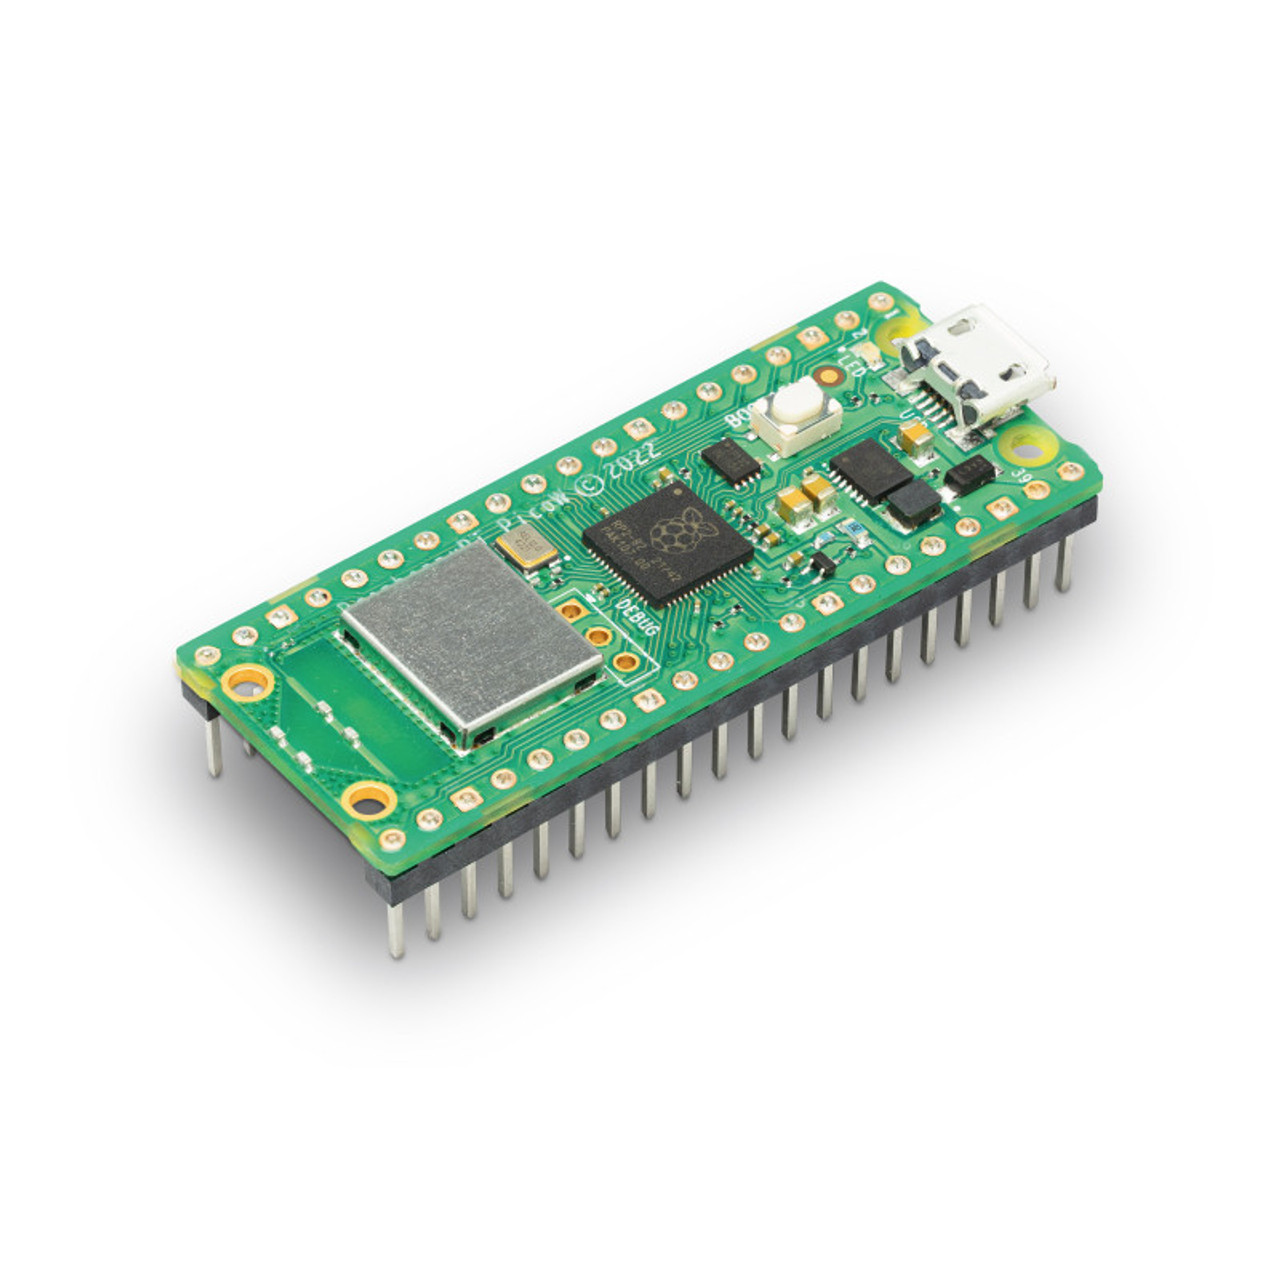  Raspberry Pi Pico W - Raspberry Pi RP2040 chip, Wi-Fi &  Bluetooth 5.2 Supported, Beginner-Friendly microcontroller, Small &  Flexible Design : Electronics